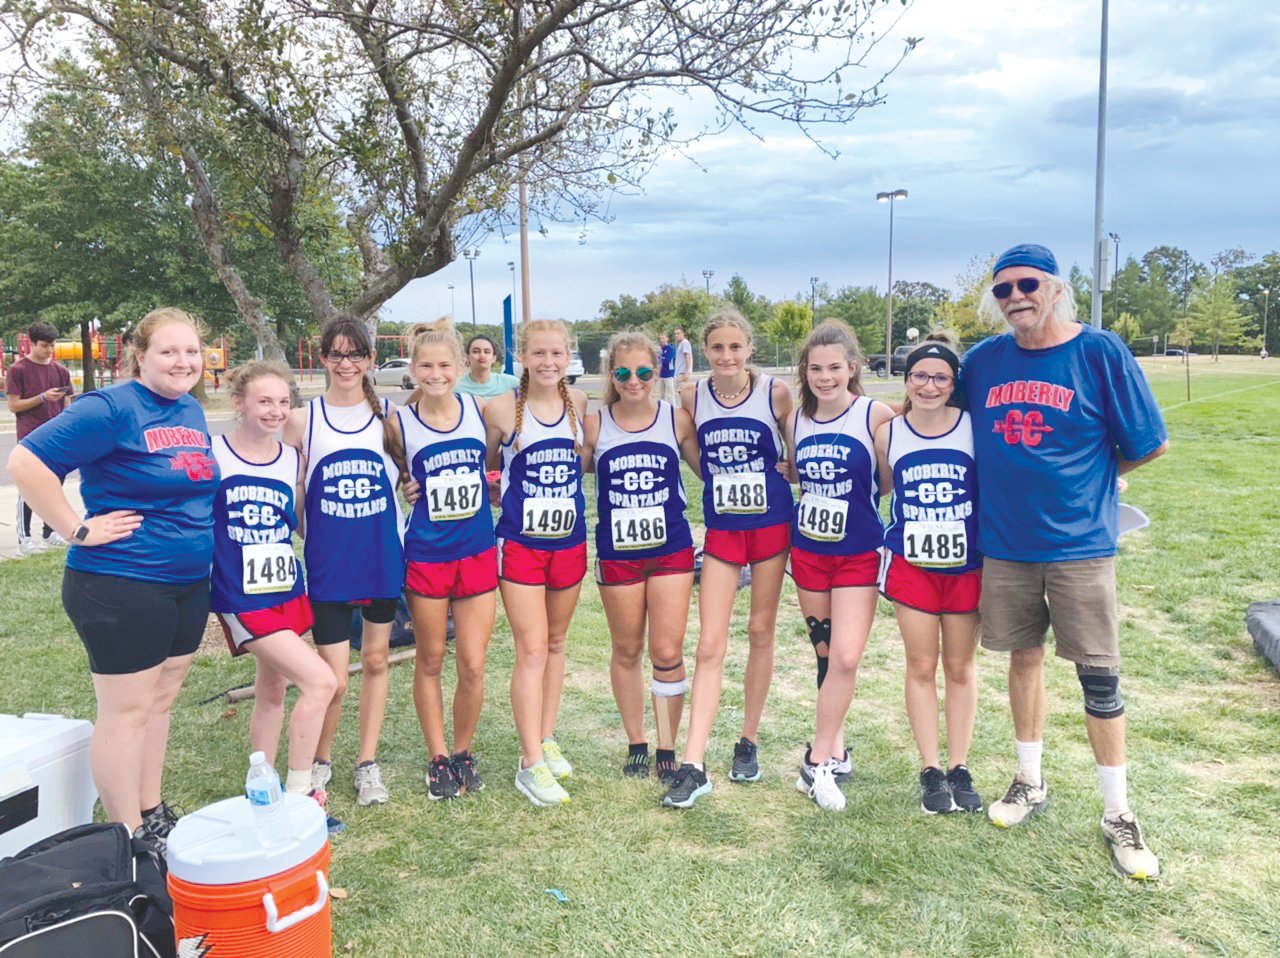 Pictured above are members of the Moberly girls cross country team that took first place at last week’s home meet. Pictured, from left, are Coach Brandi Colbert, Kadence Blair, Lily Barker, Anna Rivera, Arianna Wilkey, Marlana Pence, Chloe Ross, Faith Snodgrass, Whitney Fenton, Coach Greg Carroll. (Submitted photo)